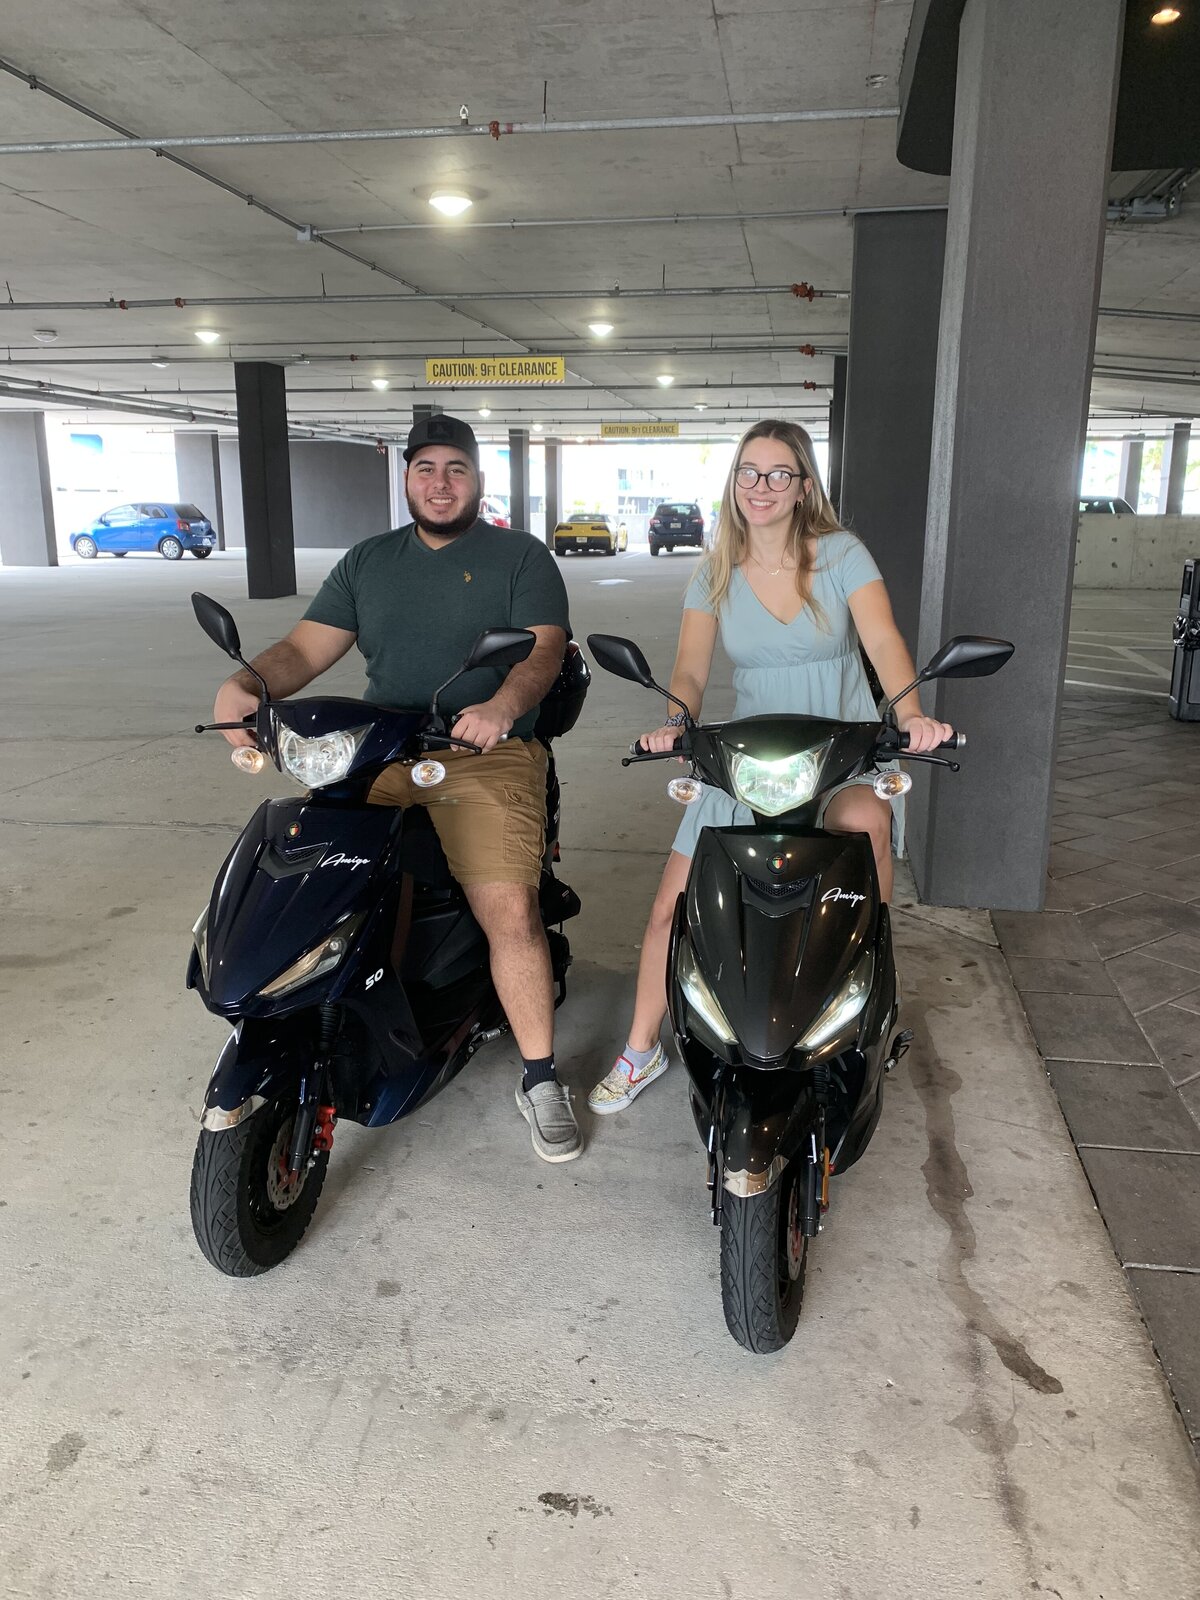 Moped scooter rental Madeira beach indian rocks beach date night Levique tours and rentals